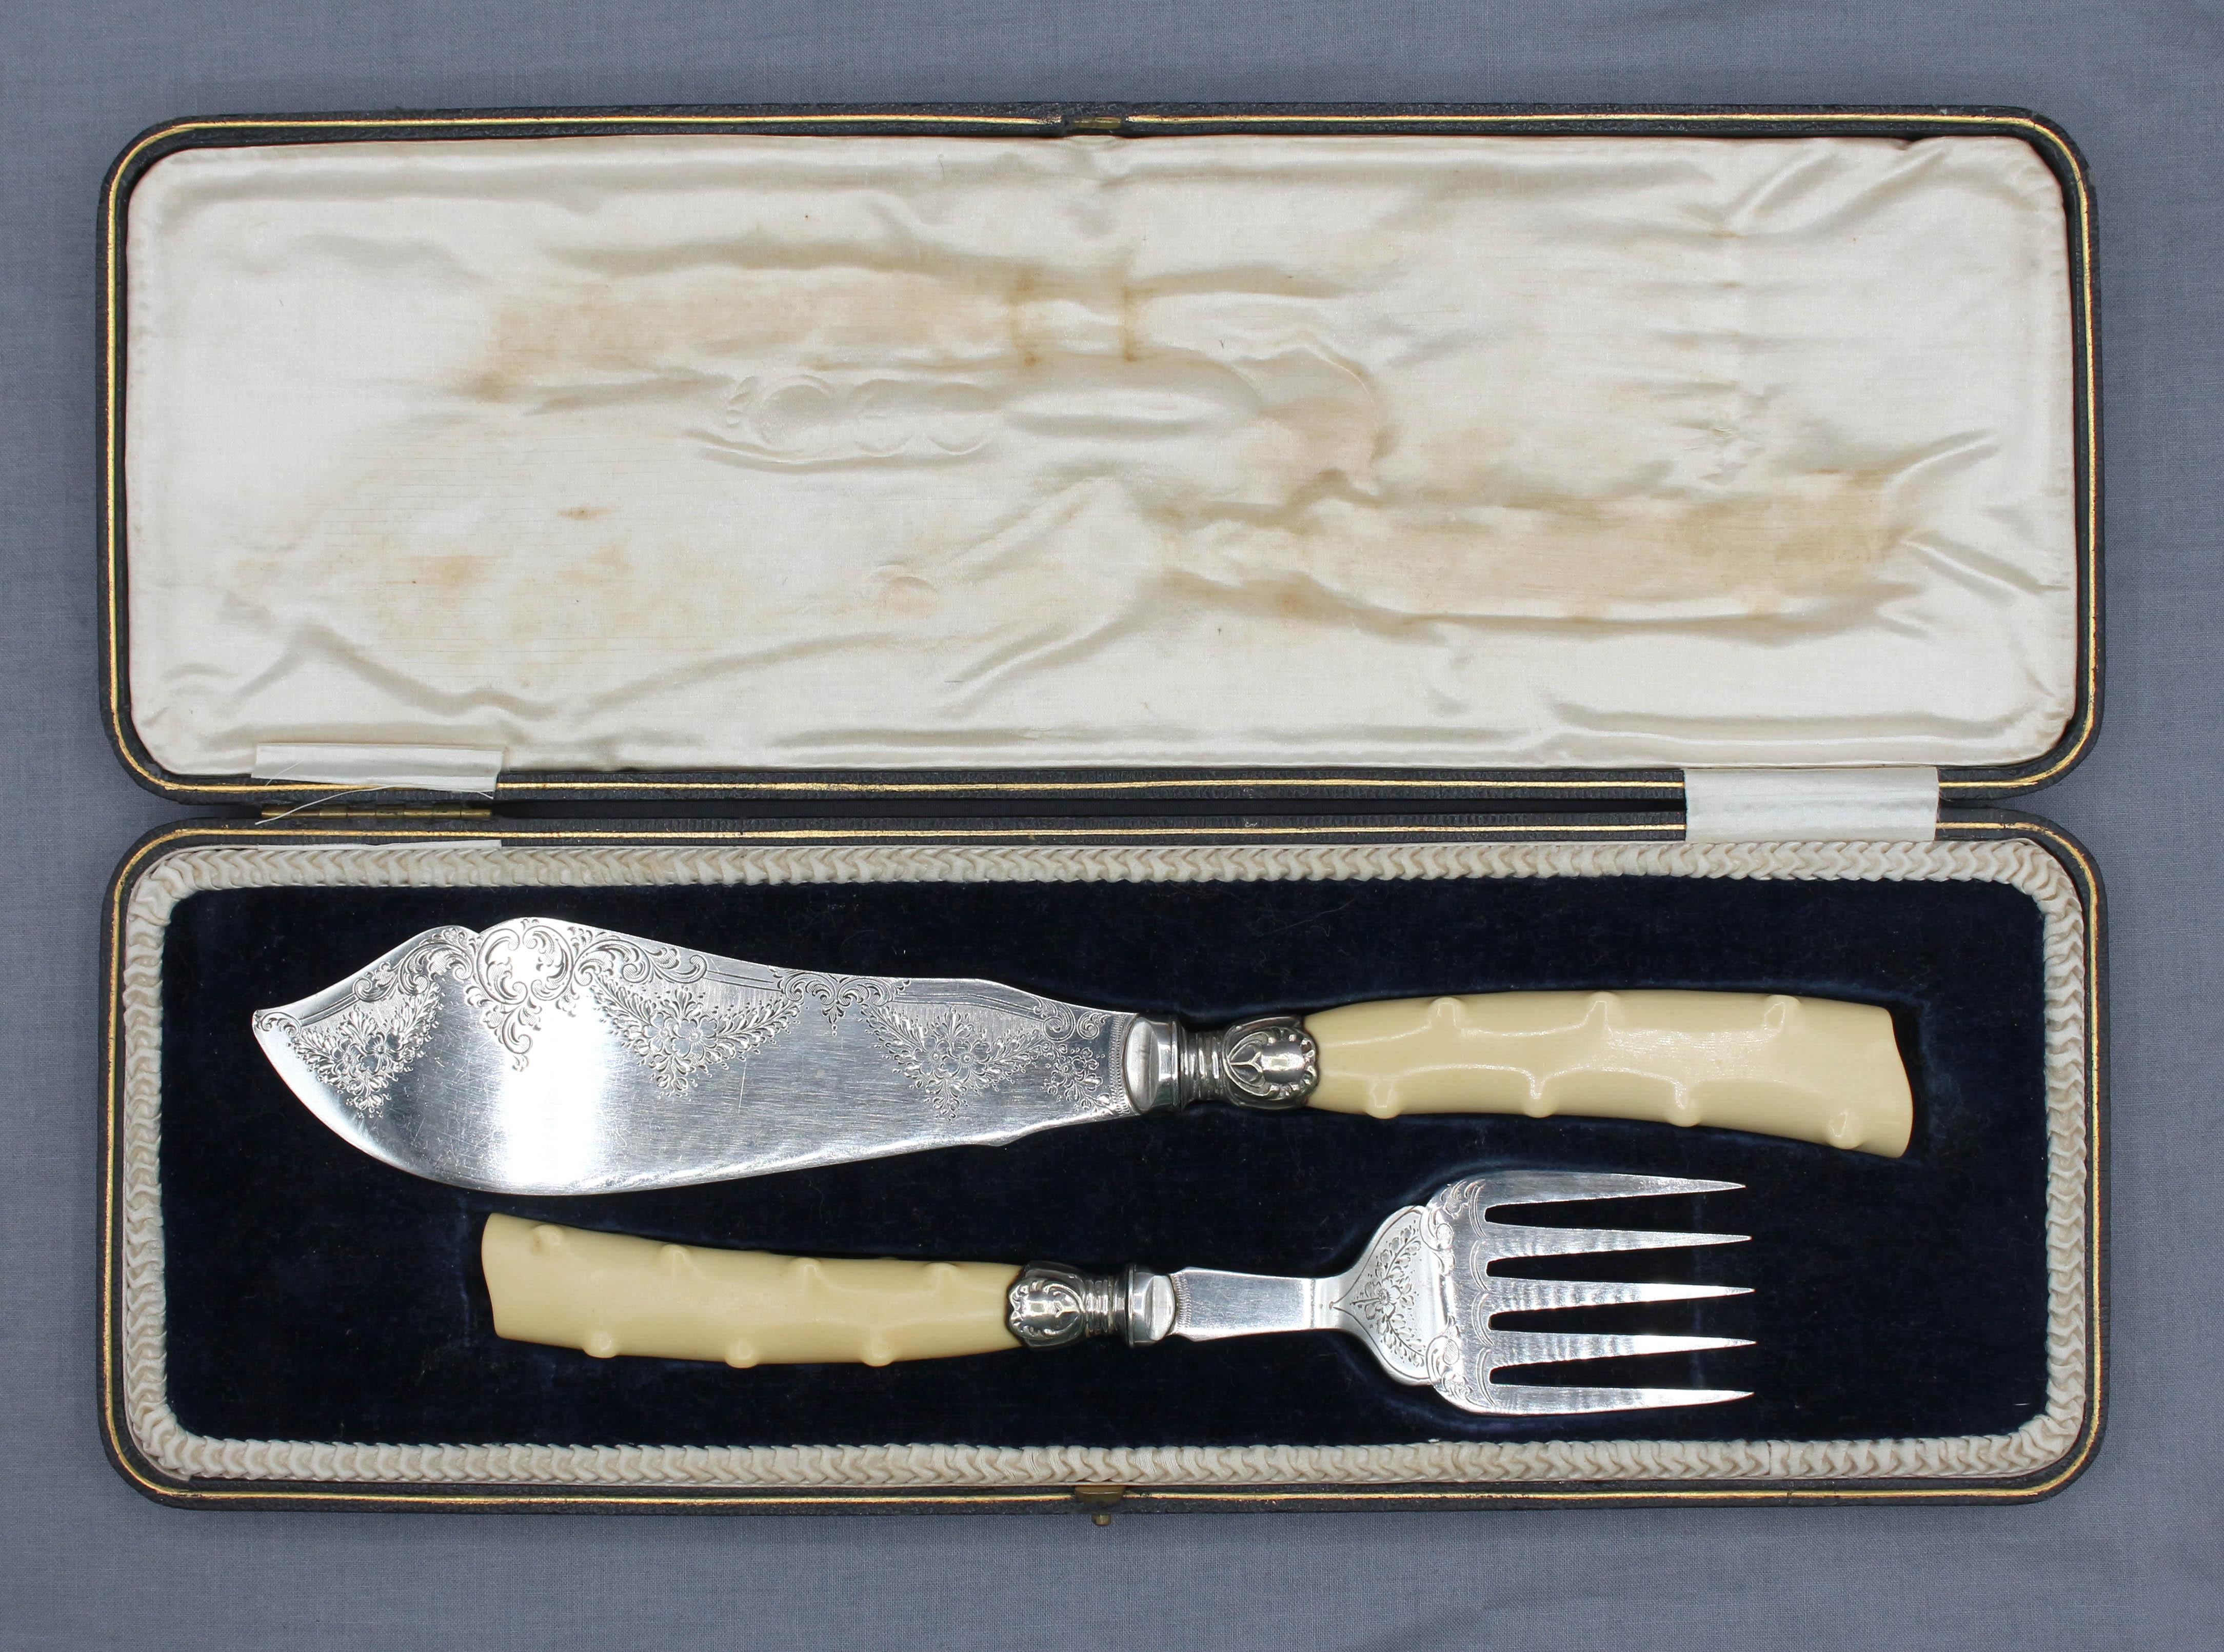 Early 20th century pair of fish servers in original presentation case, English. Engraved silver plate on nickle blade & fork with silver plate ferrules and faux bois molded ivorine handles. By Harrison Fisher & Co, 1900-1925 hallmarks. Elegant